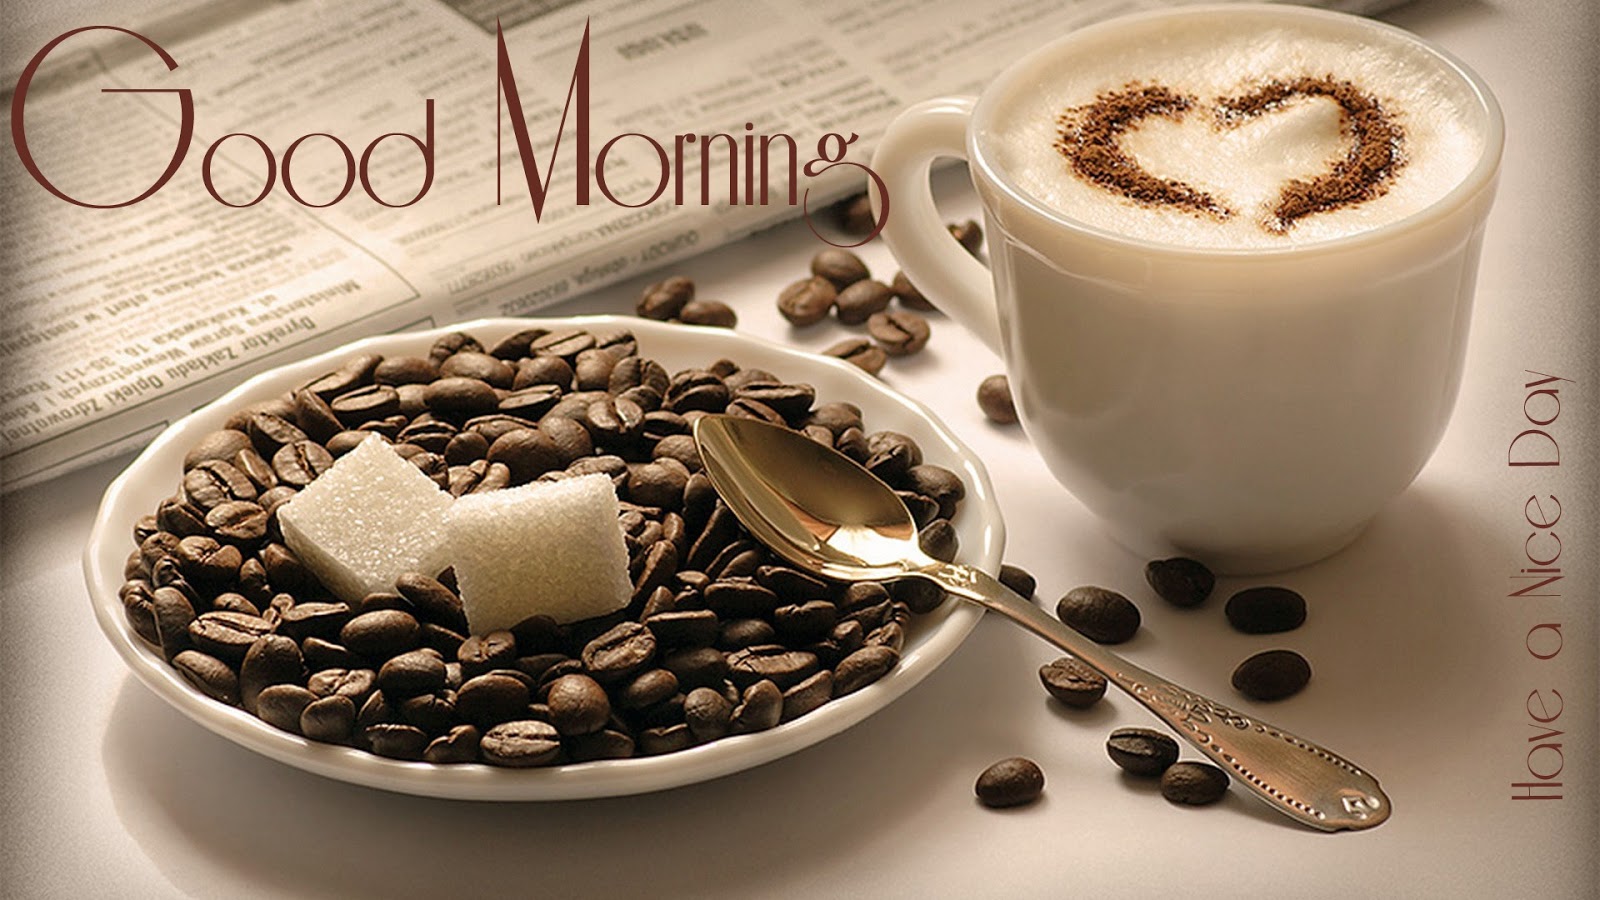 Have A Tea And Start Ur Day Freshly Good Morning Sms ~ English Sms And Quotes